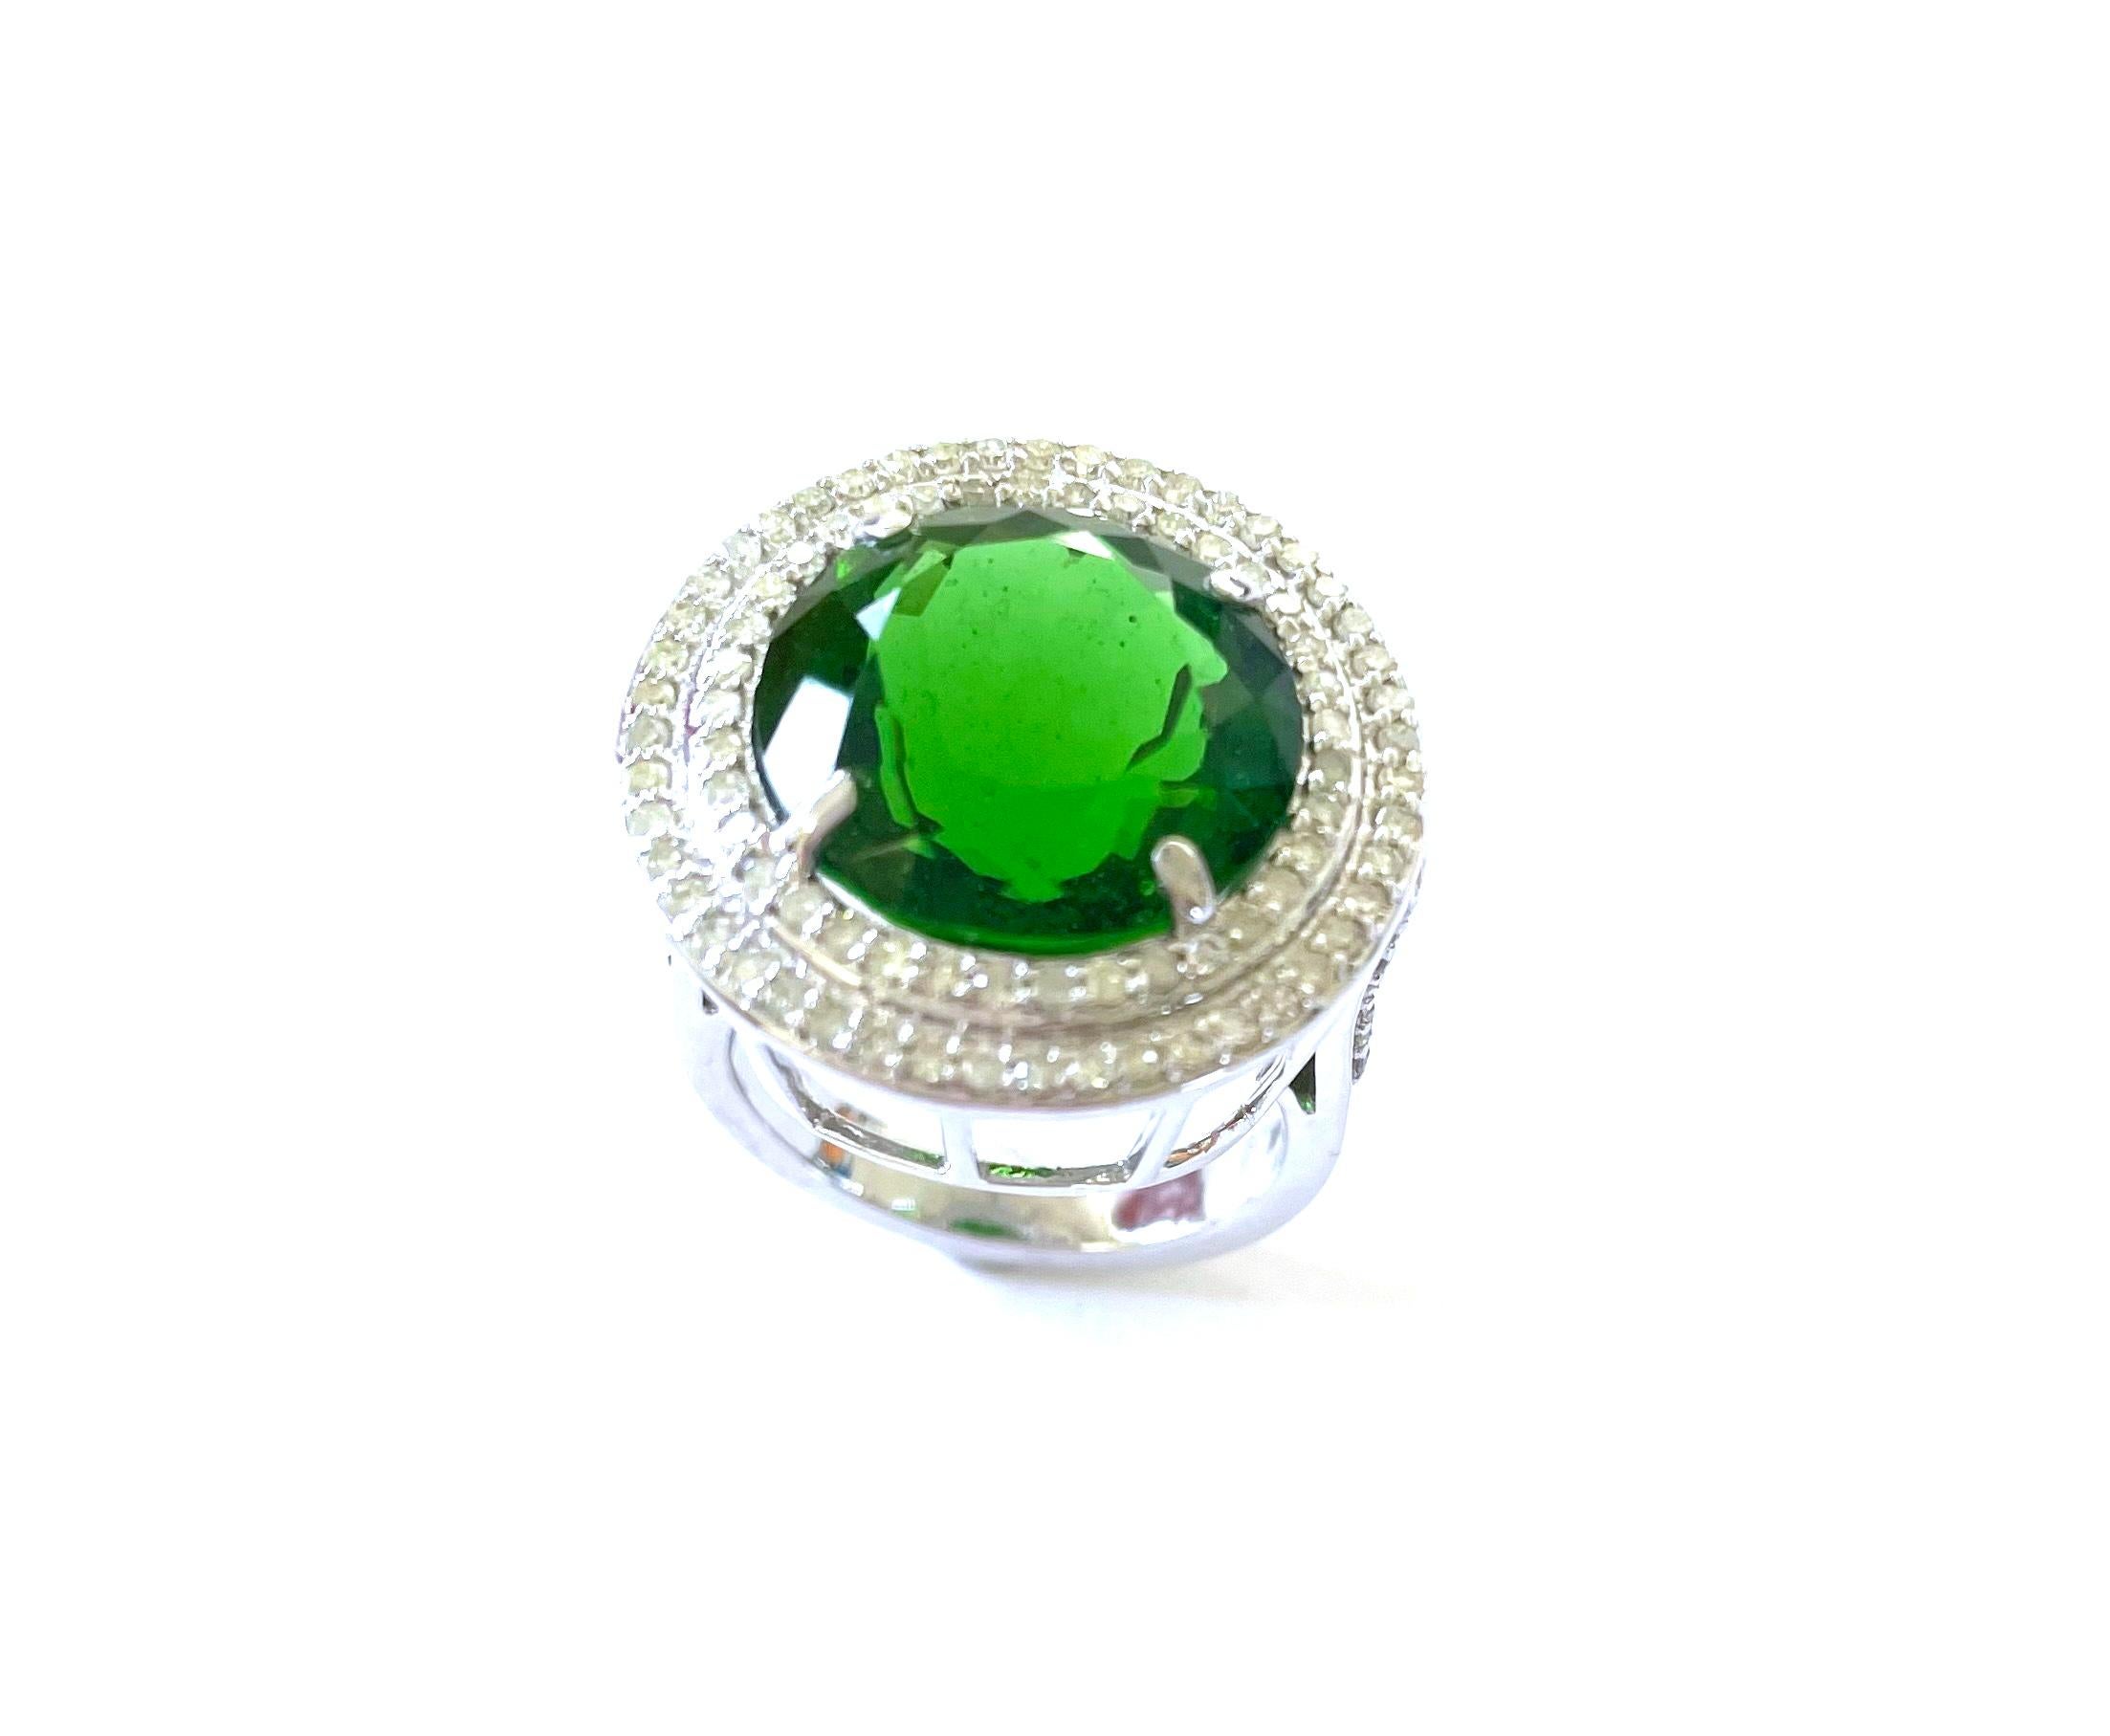 Description
Extremely rare and large size vibrant green Chrome Diopside with pave diamonds ring.
Item # R172

Materials and Weight
Chrome Diopside, 14 x 10mm, round cut, 11 carats.
Pave diamonds, 1.01 carats.
14k white gold.

Dimensions
Size US